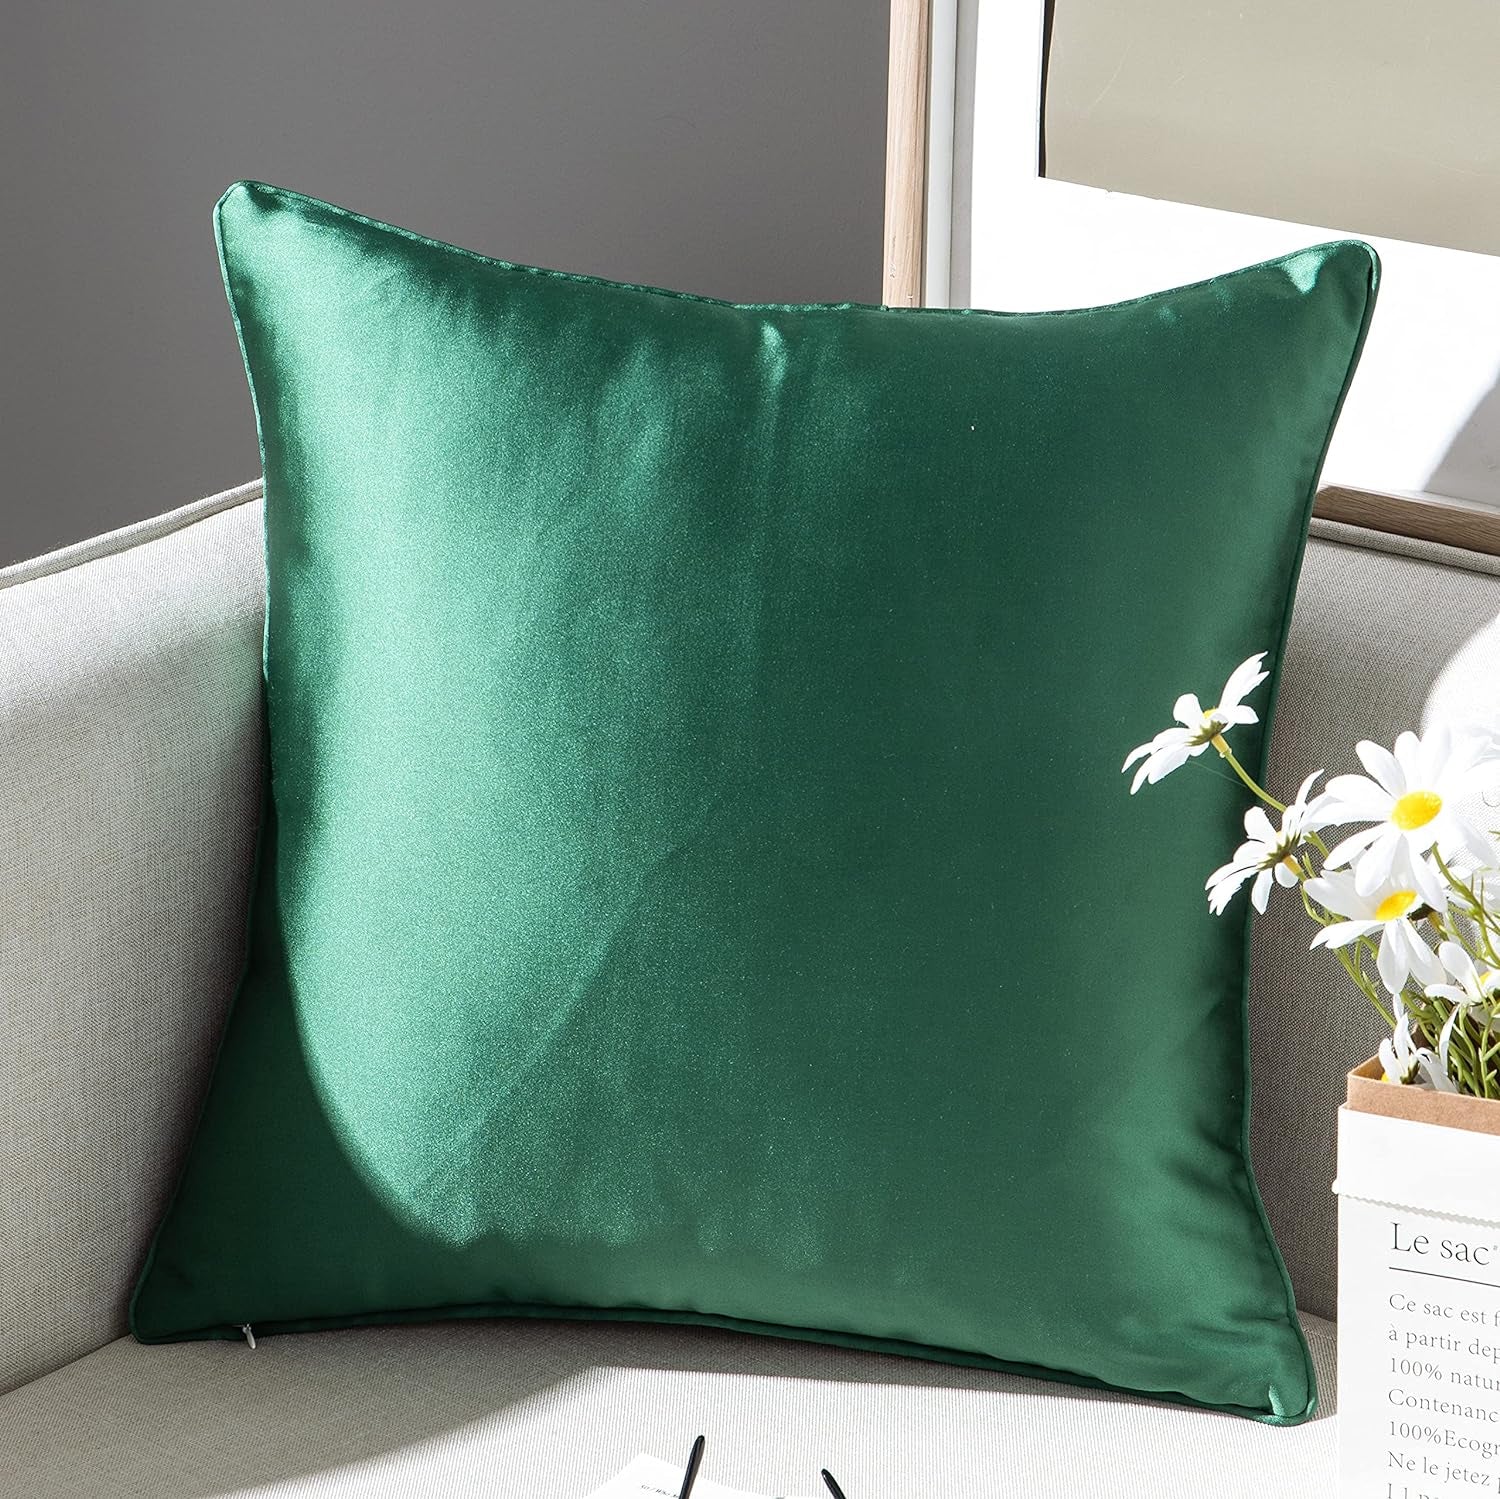 Decorative Throw Pillow Cover Luxury Jacquard Pillowcase Satin Square Cushion Case Geometric Pattern Shams for Couch Sofa Bed Bedroom Living Room 18 X 18 Inch